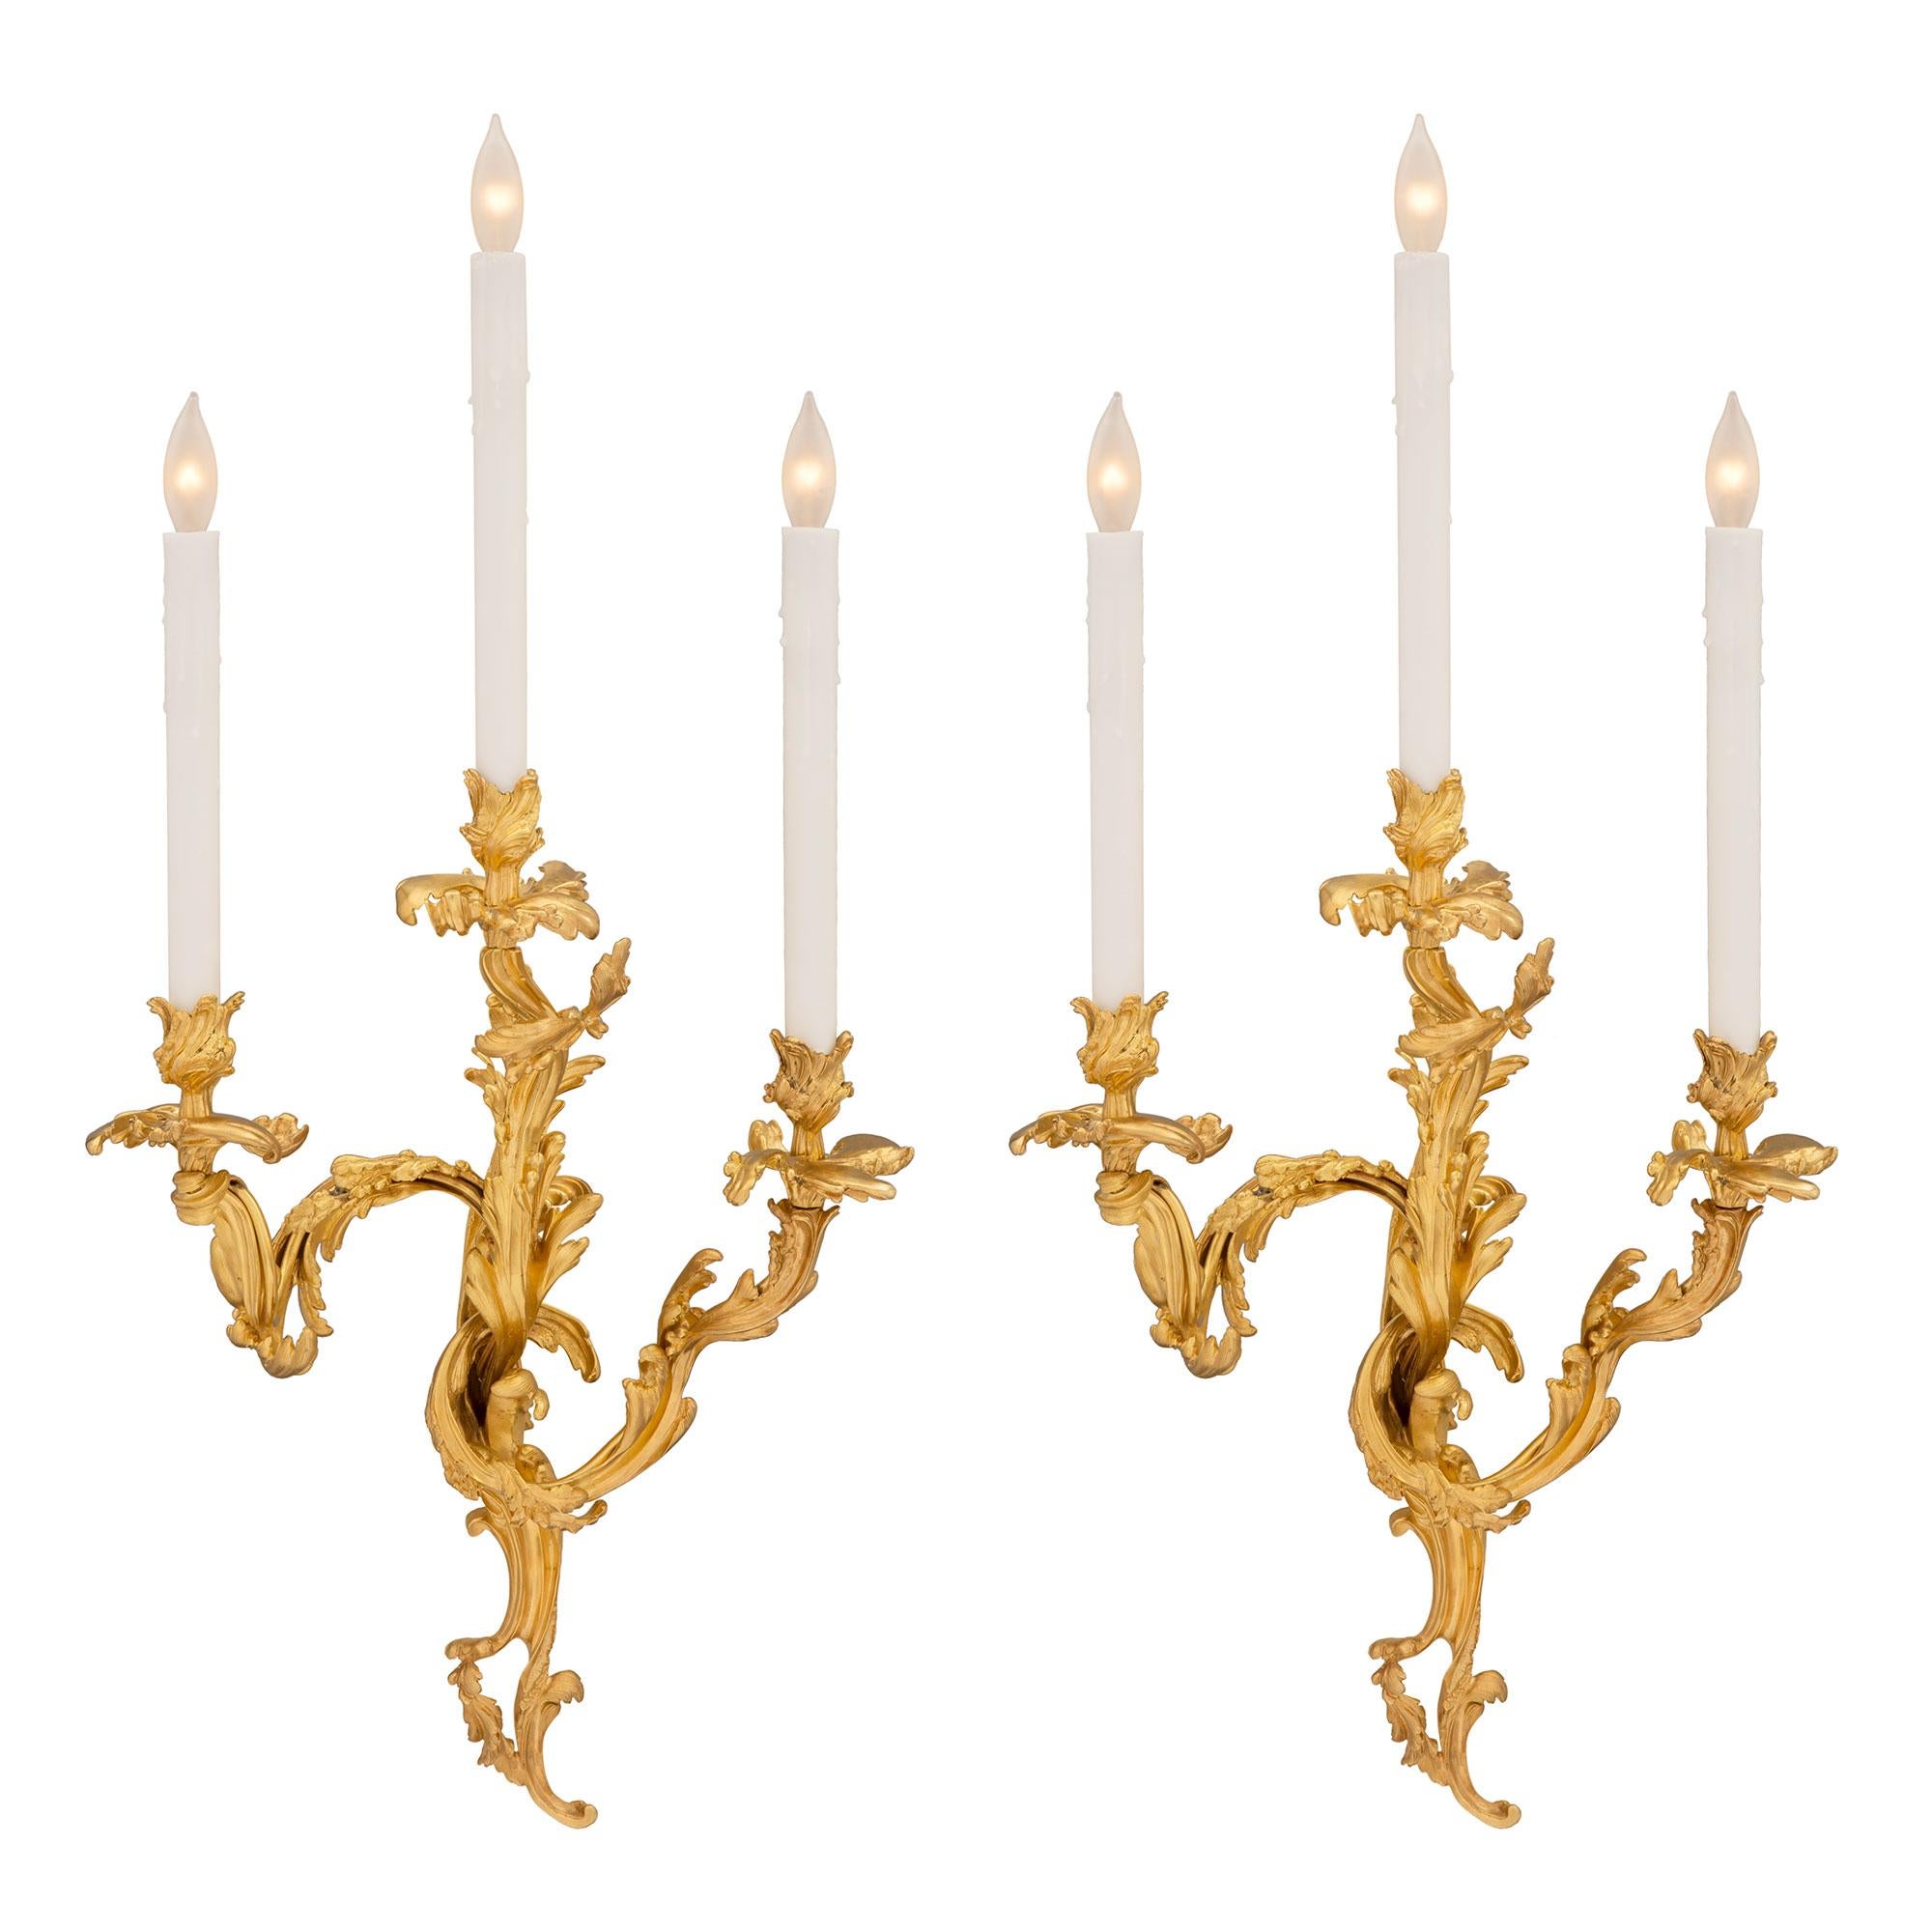 A stunning pair of French mid 19th century Louis XV st. ormolu sconces. Each three armed sconce is centered by a fine pierced scrolled foliate back plate with lovely richly chased leaves. Each of the beautifully scrolled arms display lovely and most